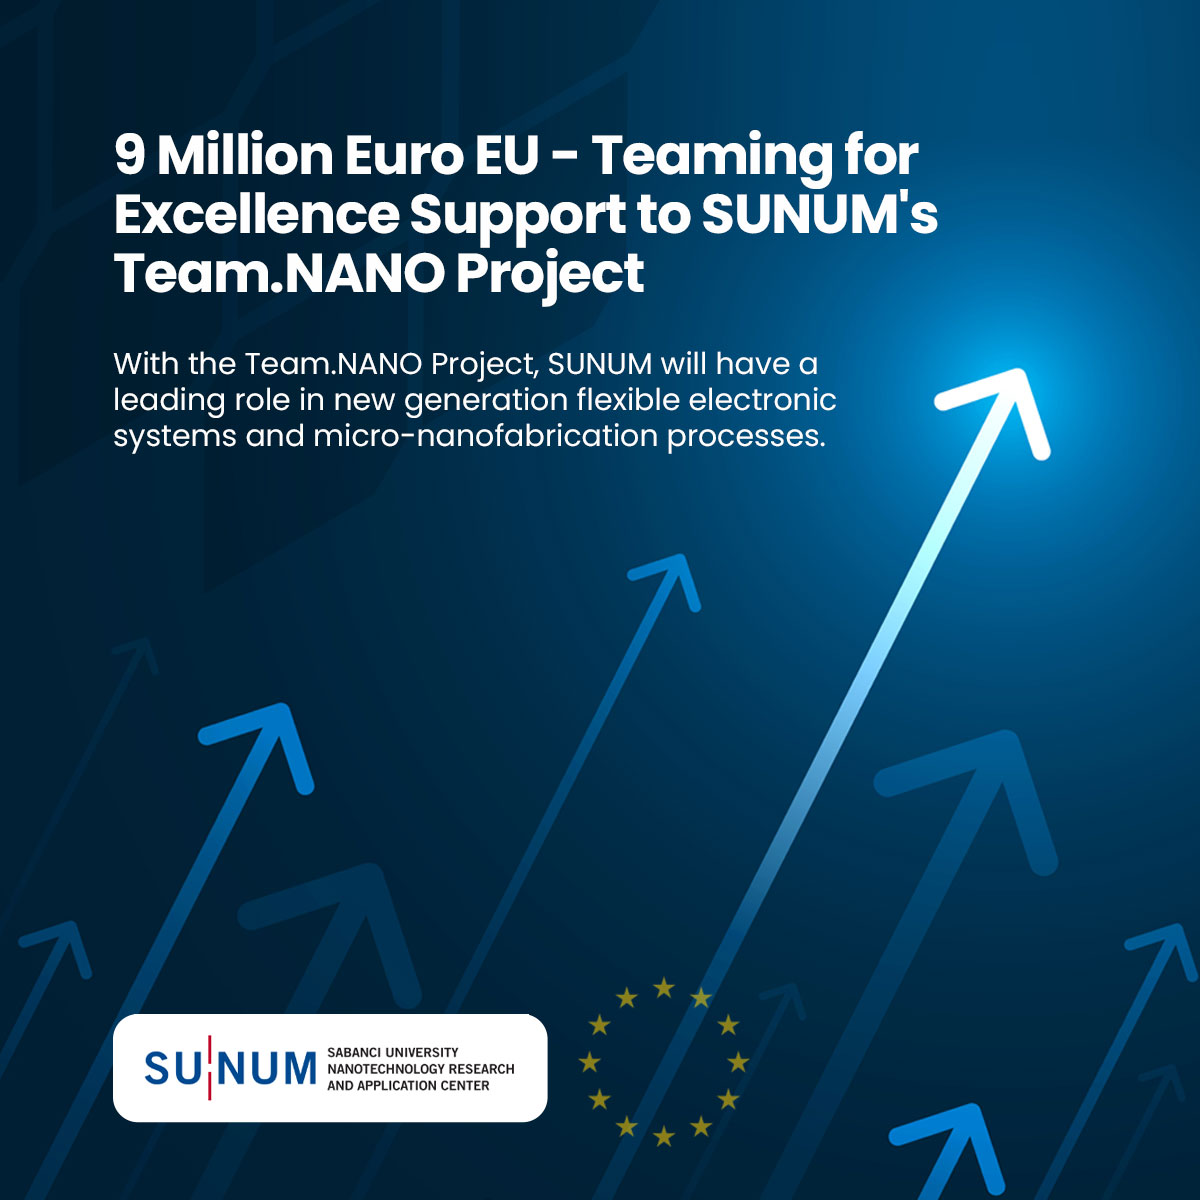 9 Million Euro EU - Teaming for Excellence Support to SUNUM's Team.NANO Project